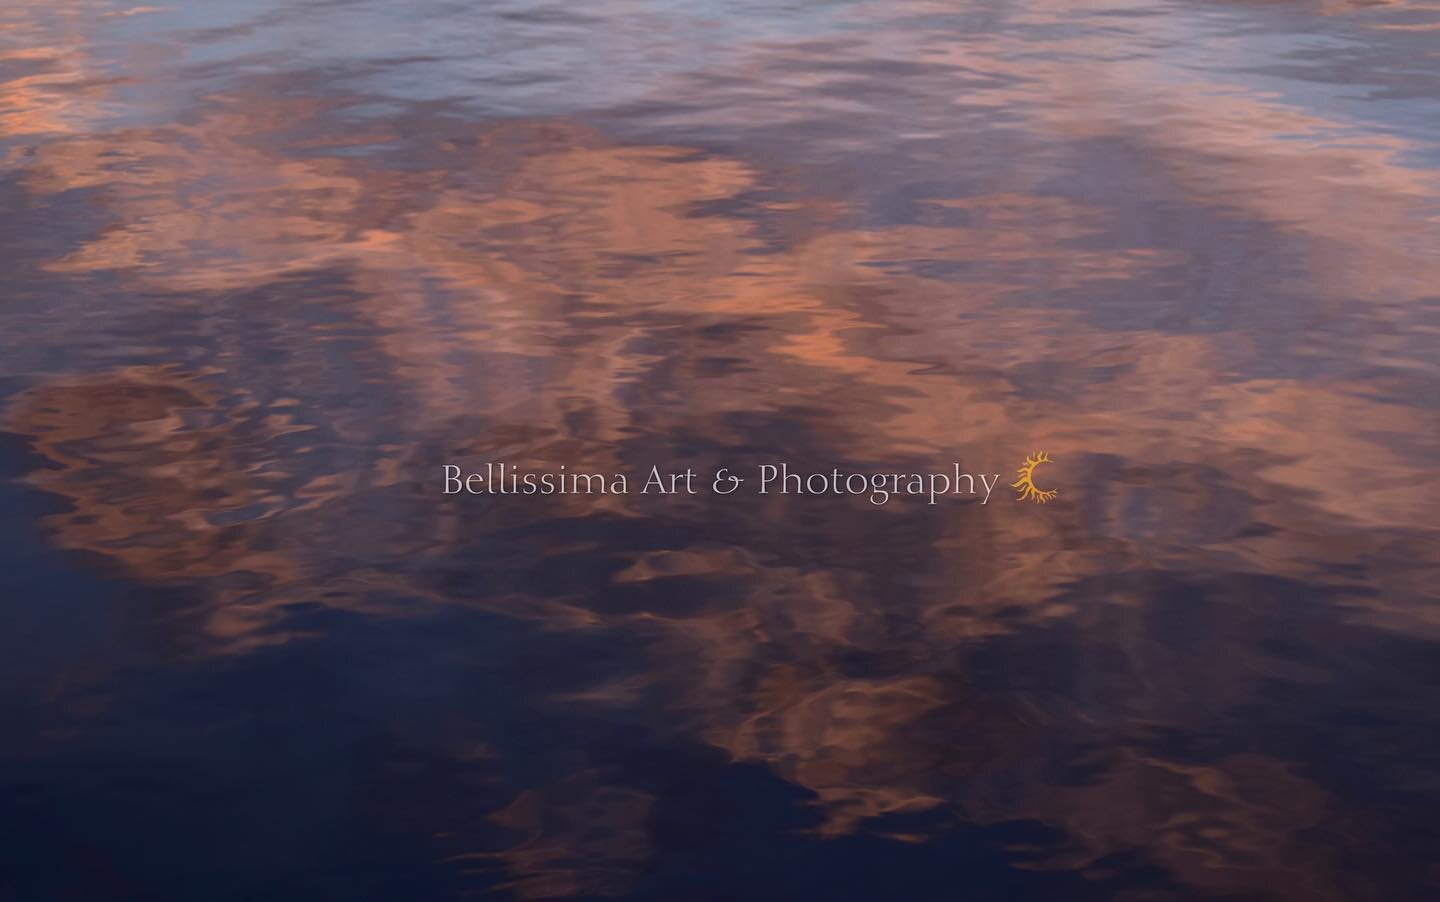 Exclusive look at 
&lsquo;Resonance&rsquo; 
16x20 Canvas Print 
Bellissima Art &amp; Photography 
🌊
#photography #art #artist #2020 #photooftheday #color #texture #conceptual #context #reflection #contrast #connecticut #localartist #supportsmallbusi